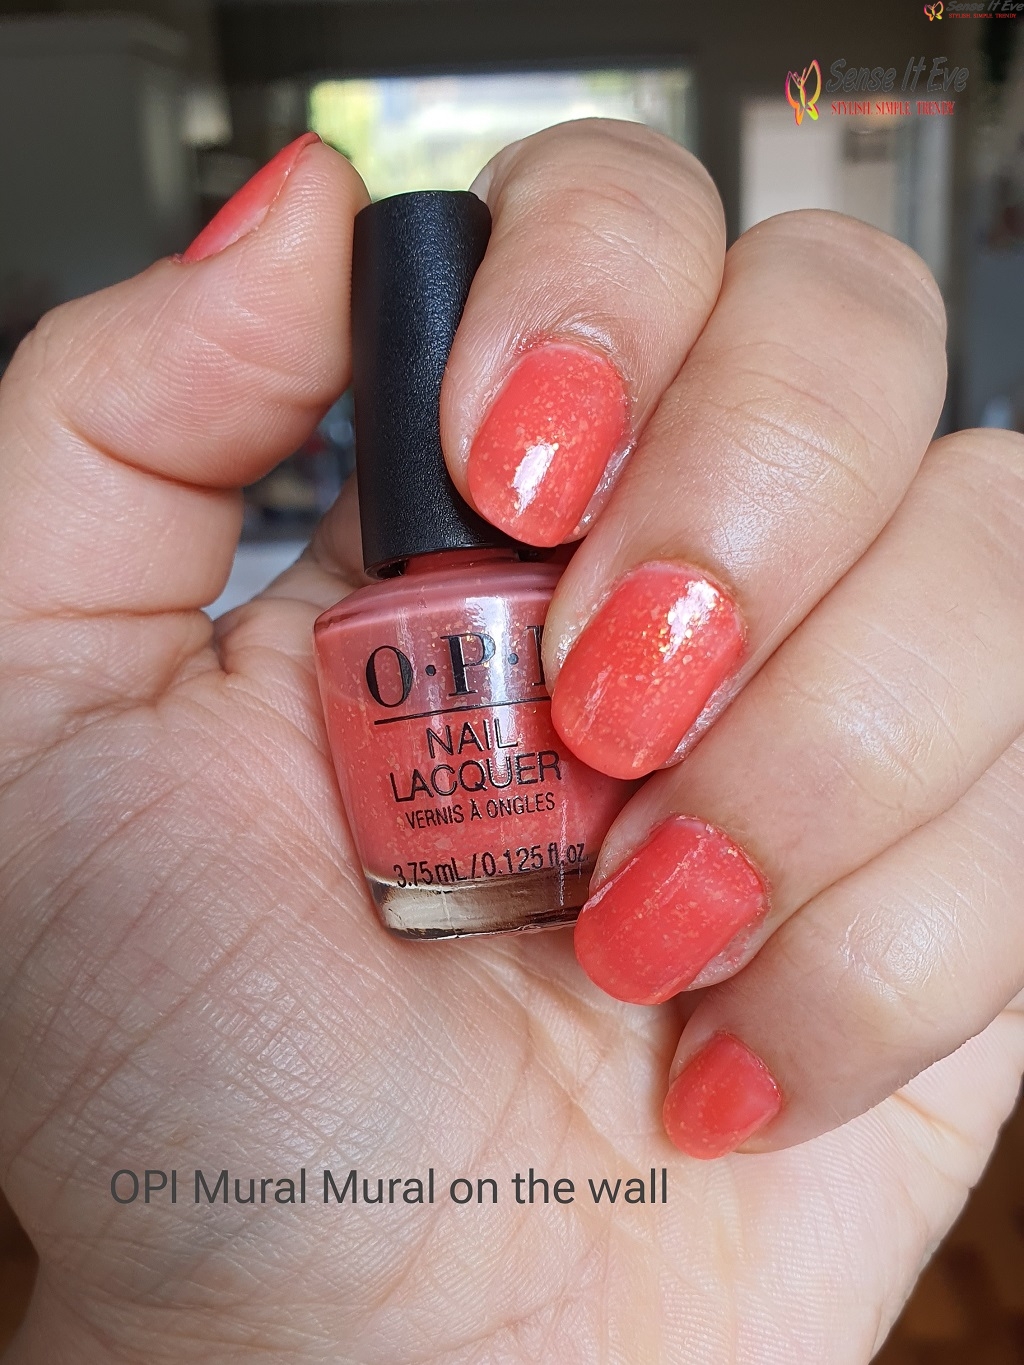 OPI Mural Mural On the Wall Sense It Eve OPI Mexico City Collection Mini Set Review